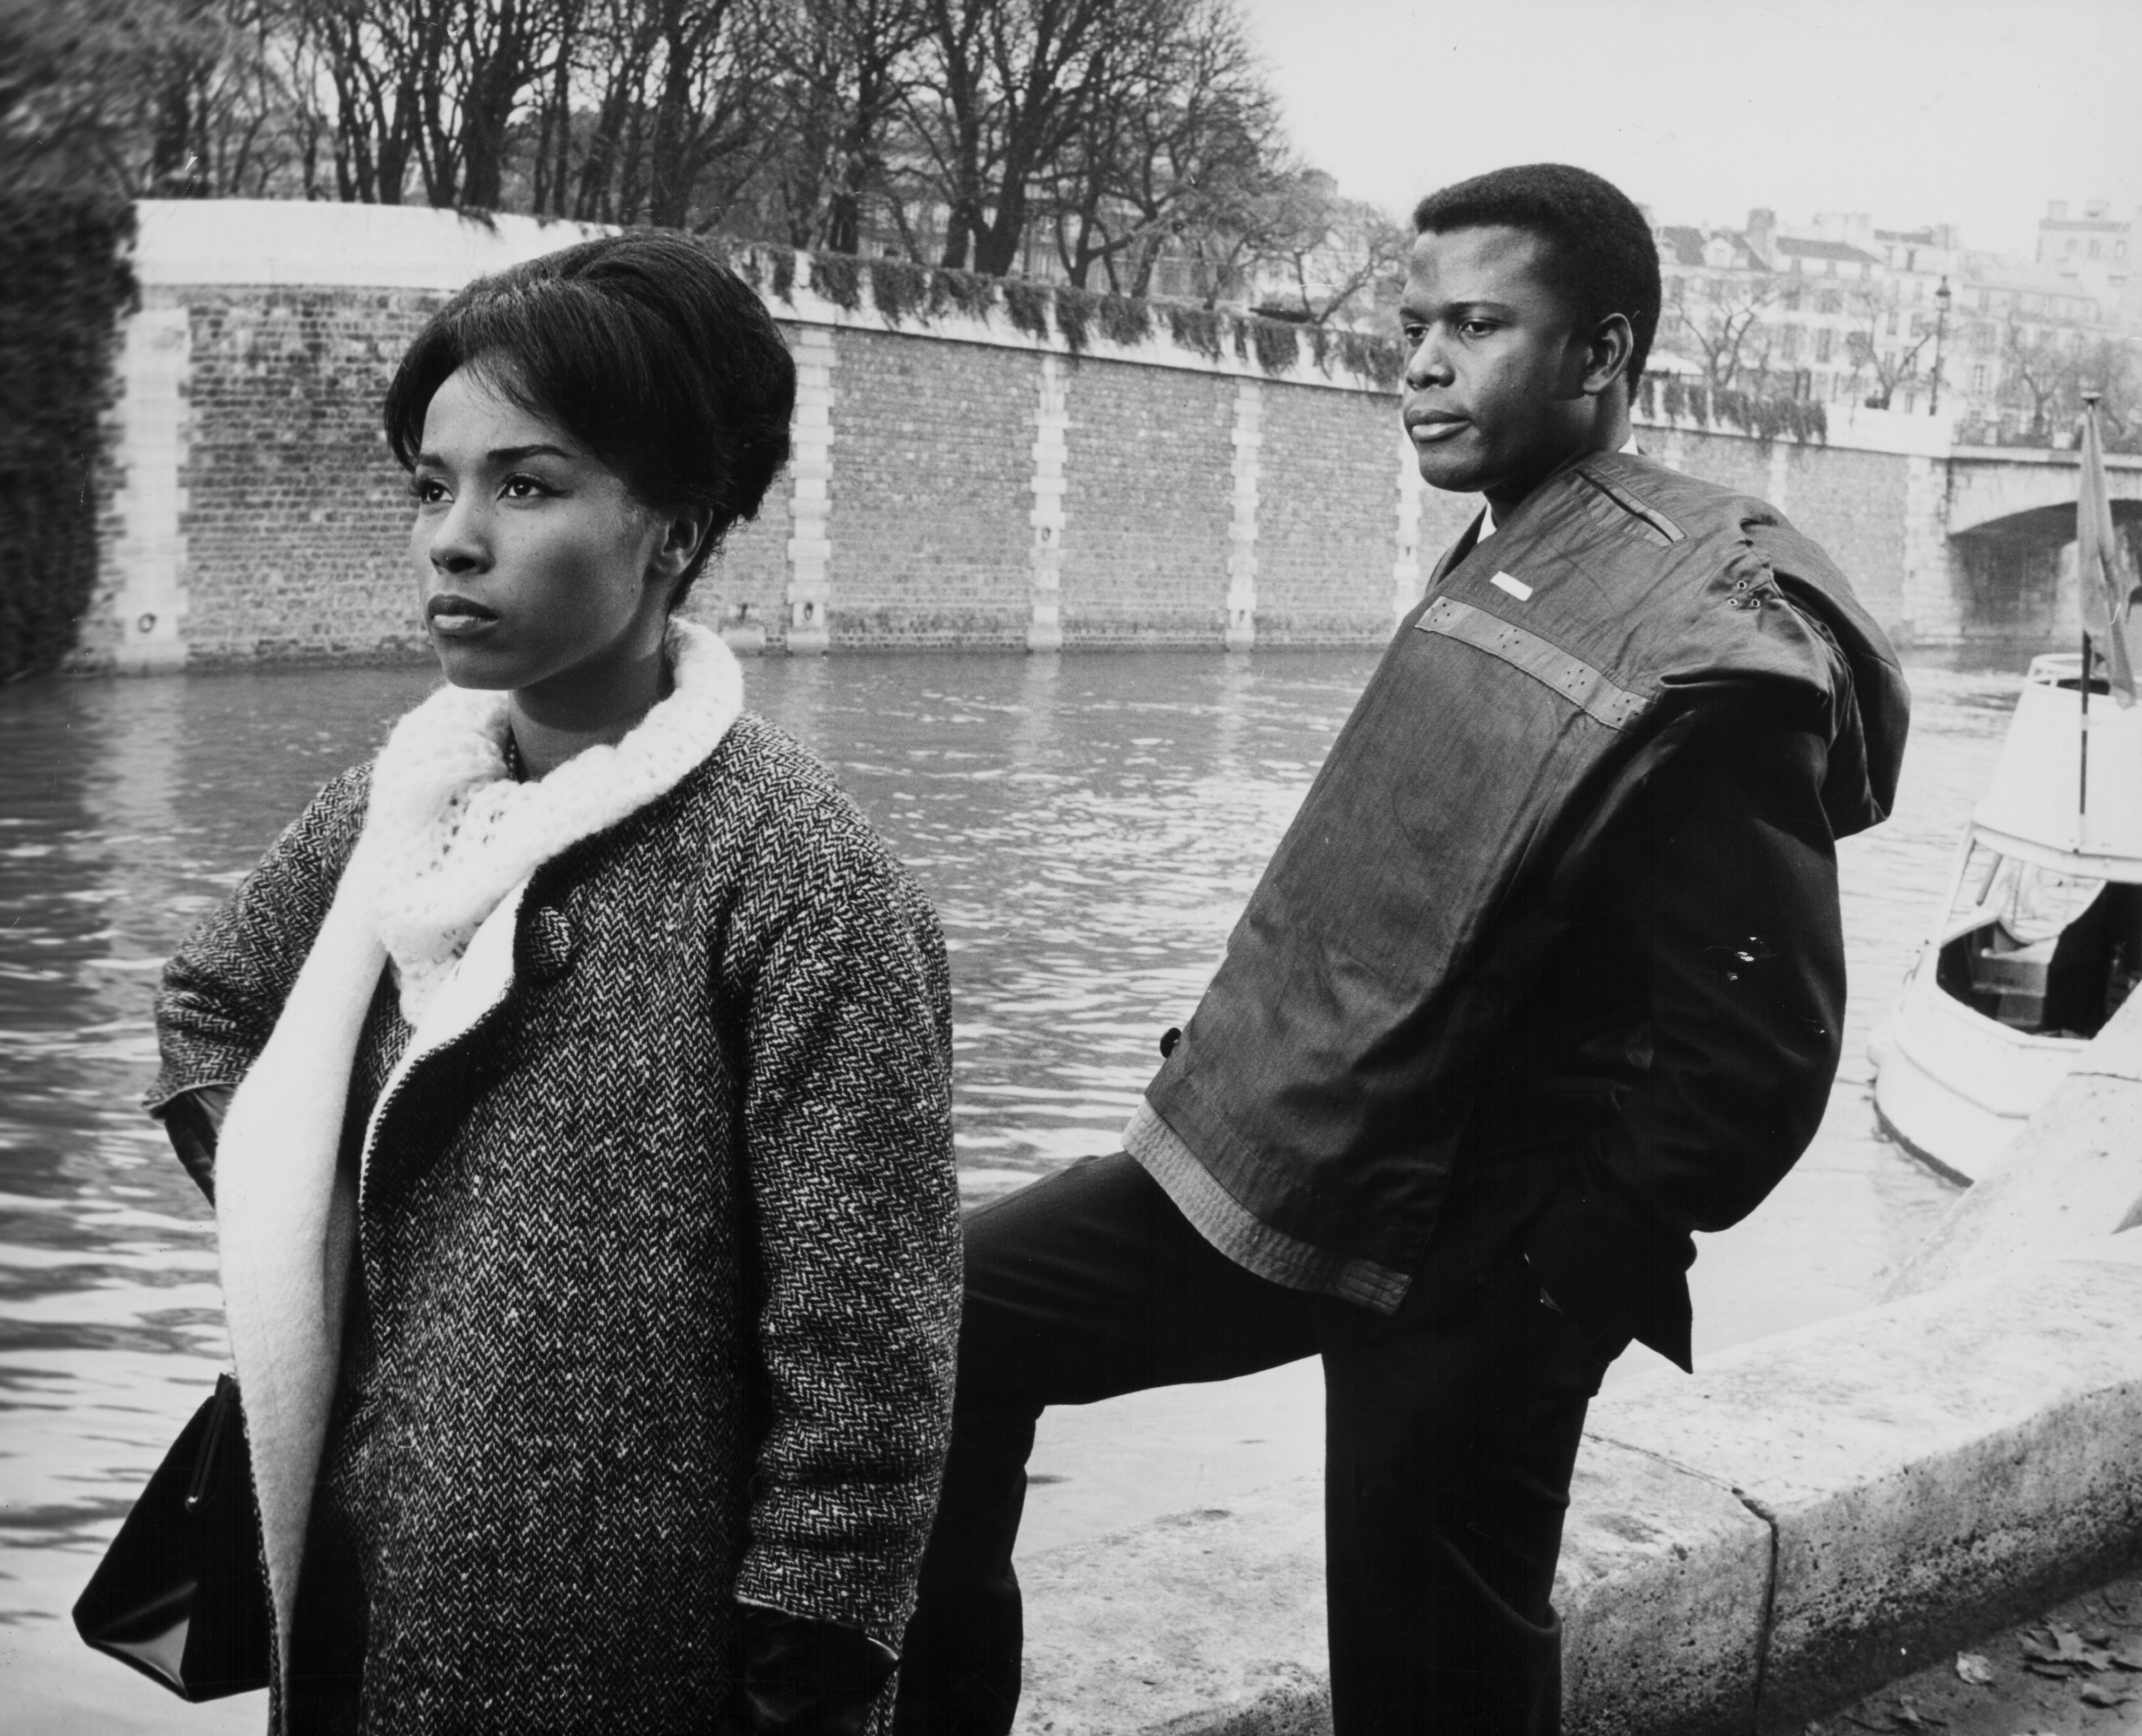  Diahann Carroll and Sidney Poitier during a scene from the movie "Paris Blues," in 1961. | Photo: Getty Images